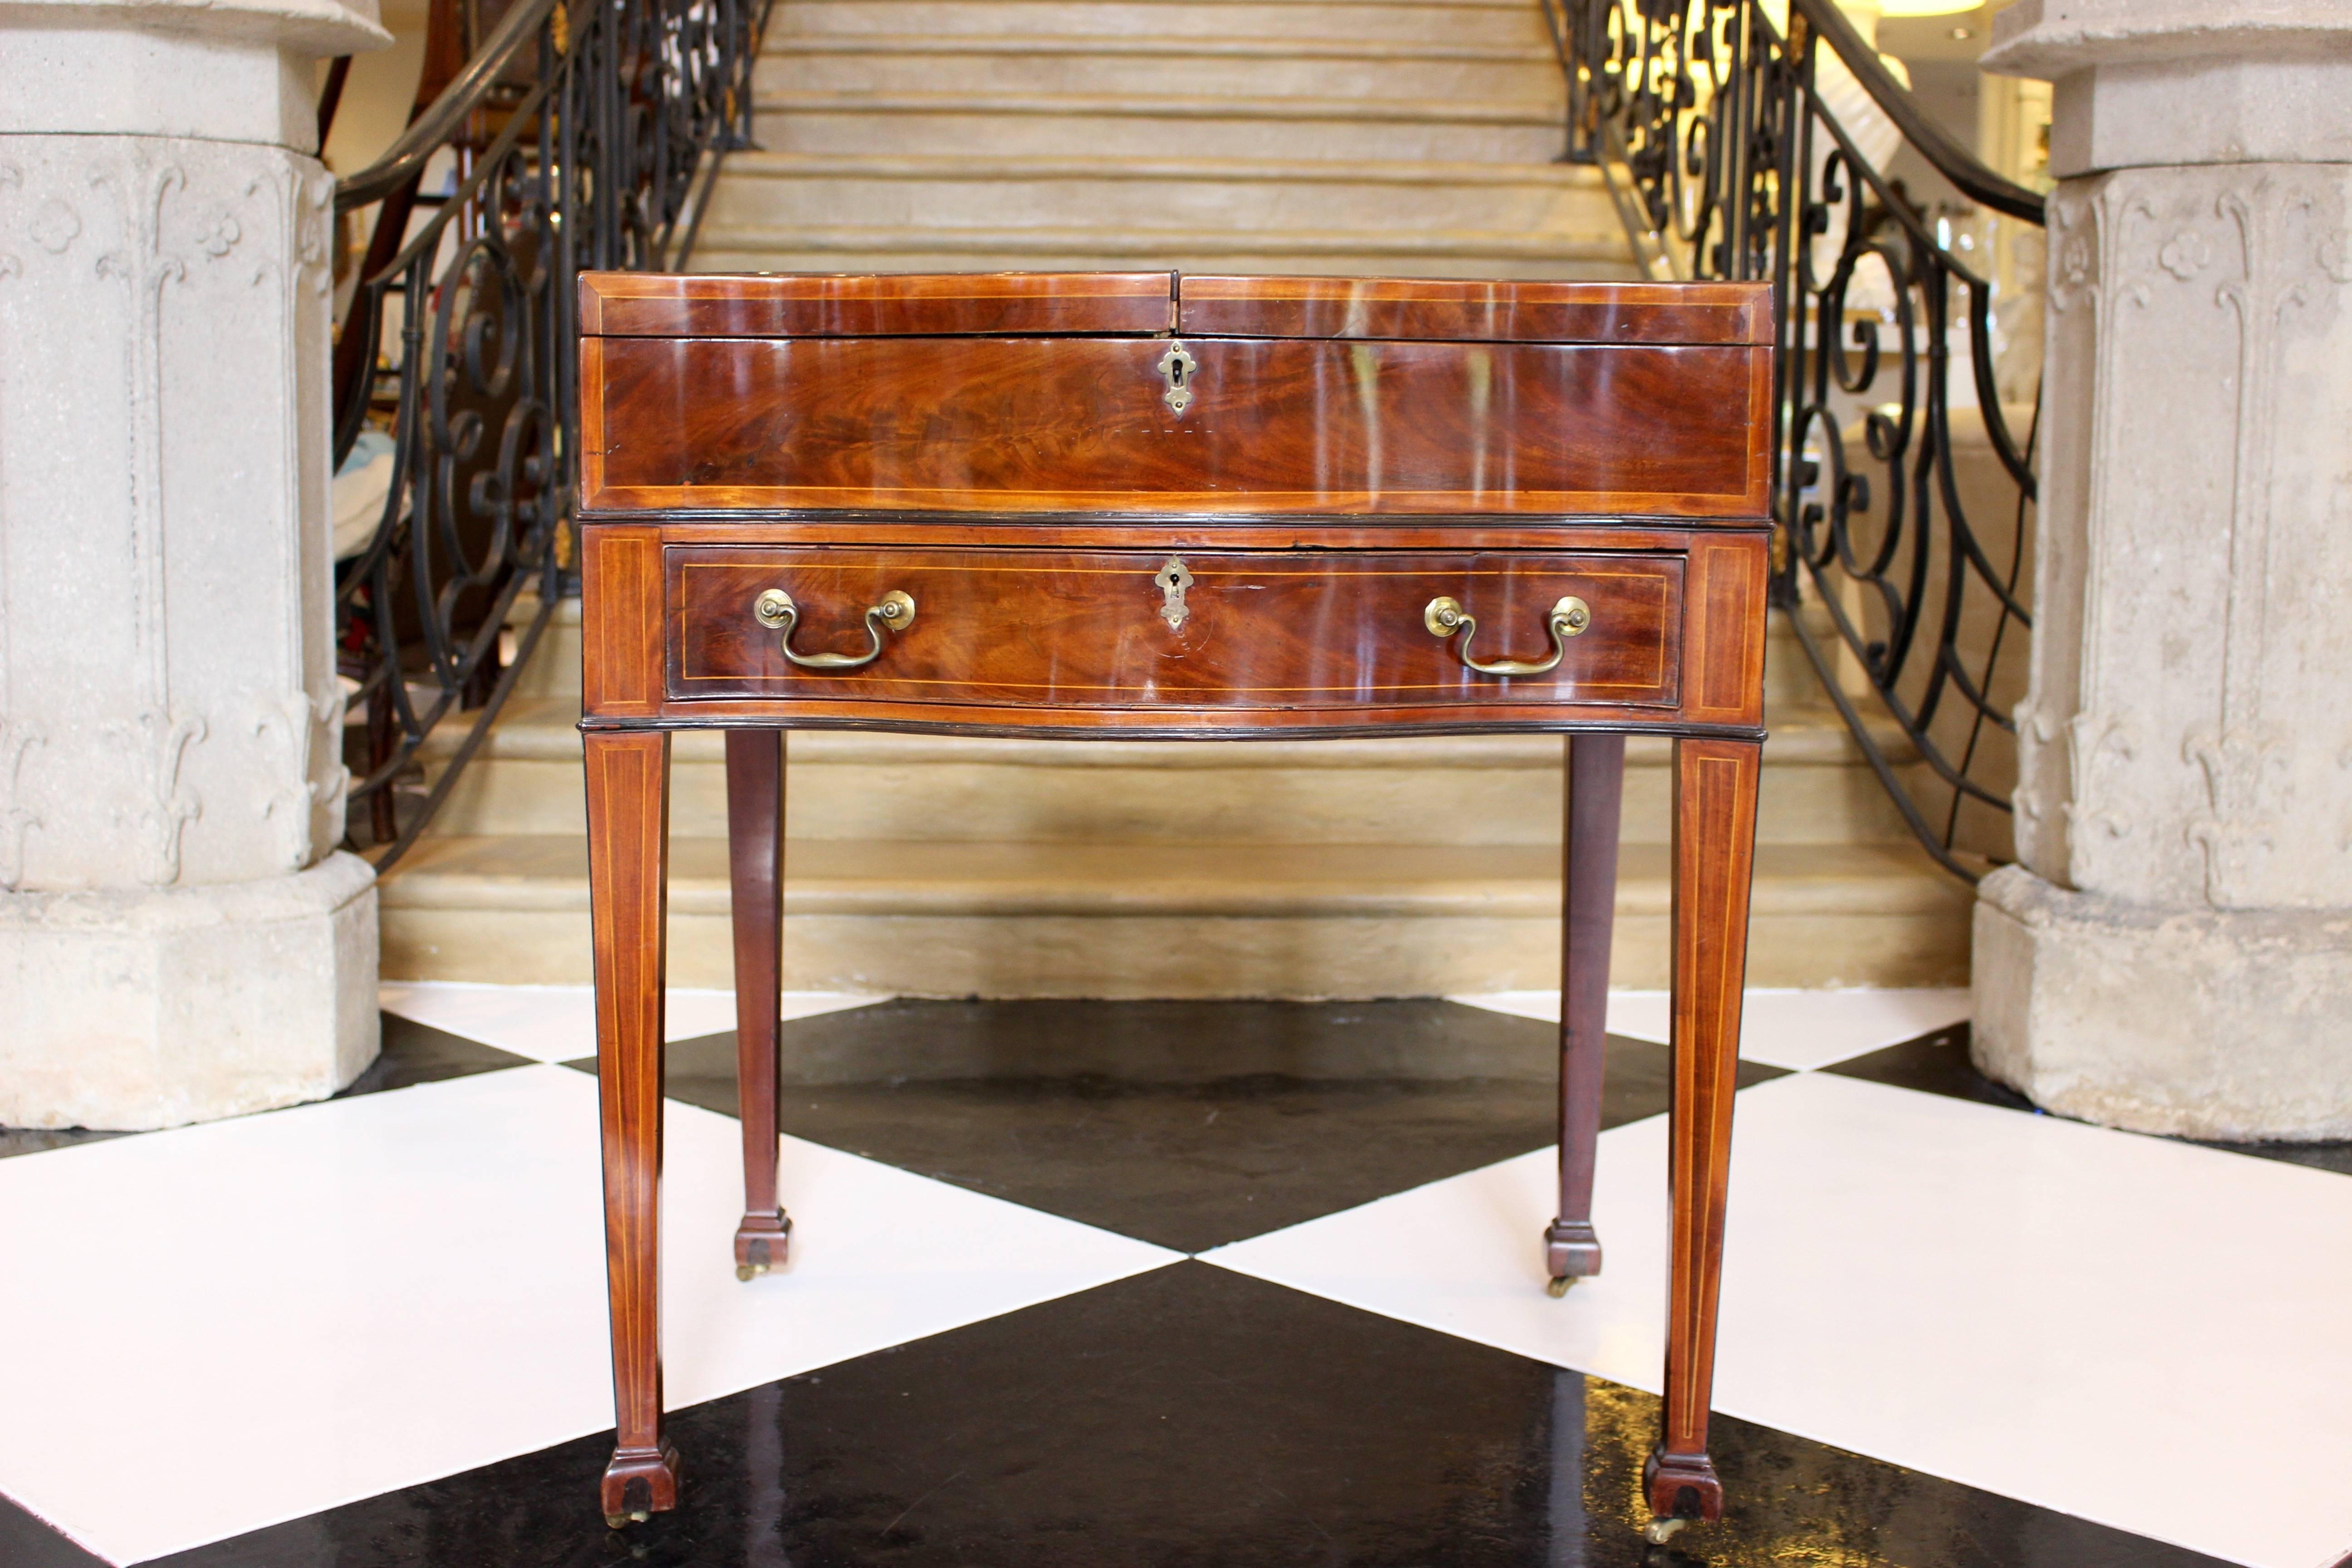 An English George III inlaid mahogany gentleman's dressing table from the last quarter of the 18th century. Raised on square tapering legs and brass casters, the serpentine case is composed of a single drawer with two brass swan neck handles